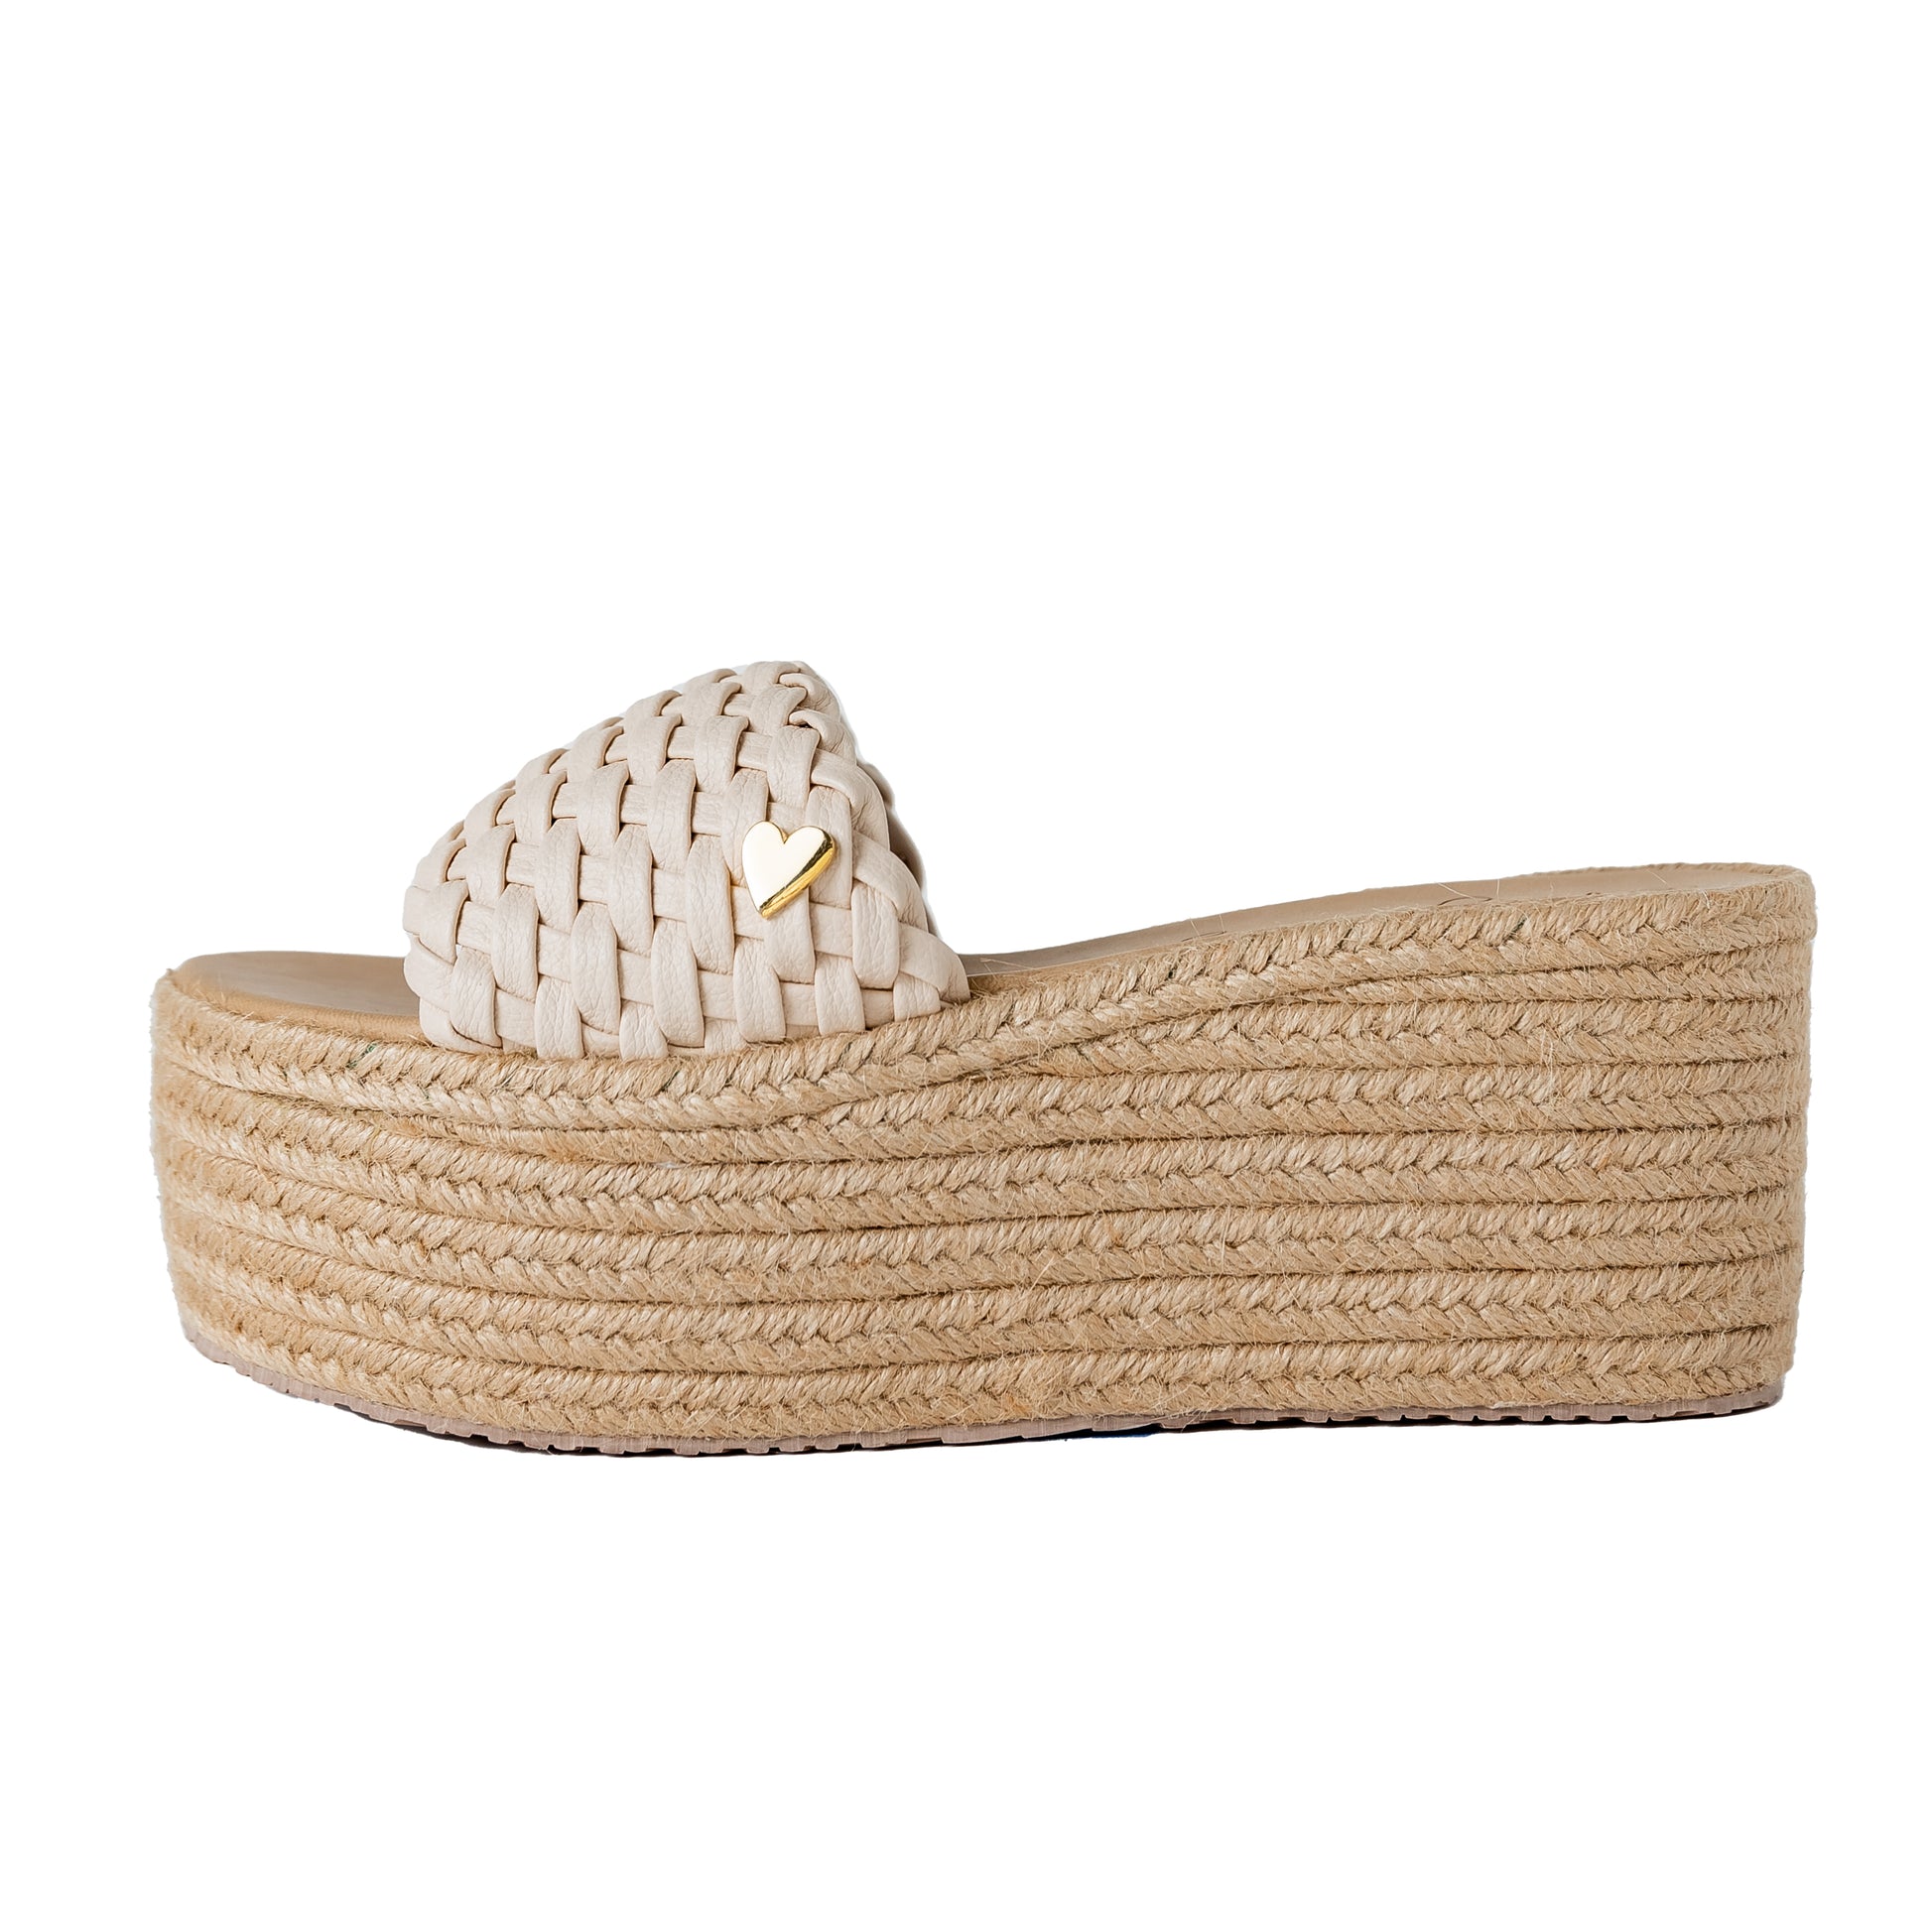 Jane Beige Sandals by Nataly Mendez Its base or platform is lined in natural fique. Vegan leather upper Insole made of vegan leather.